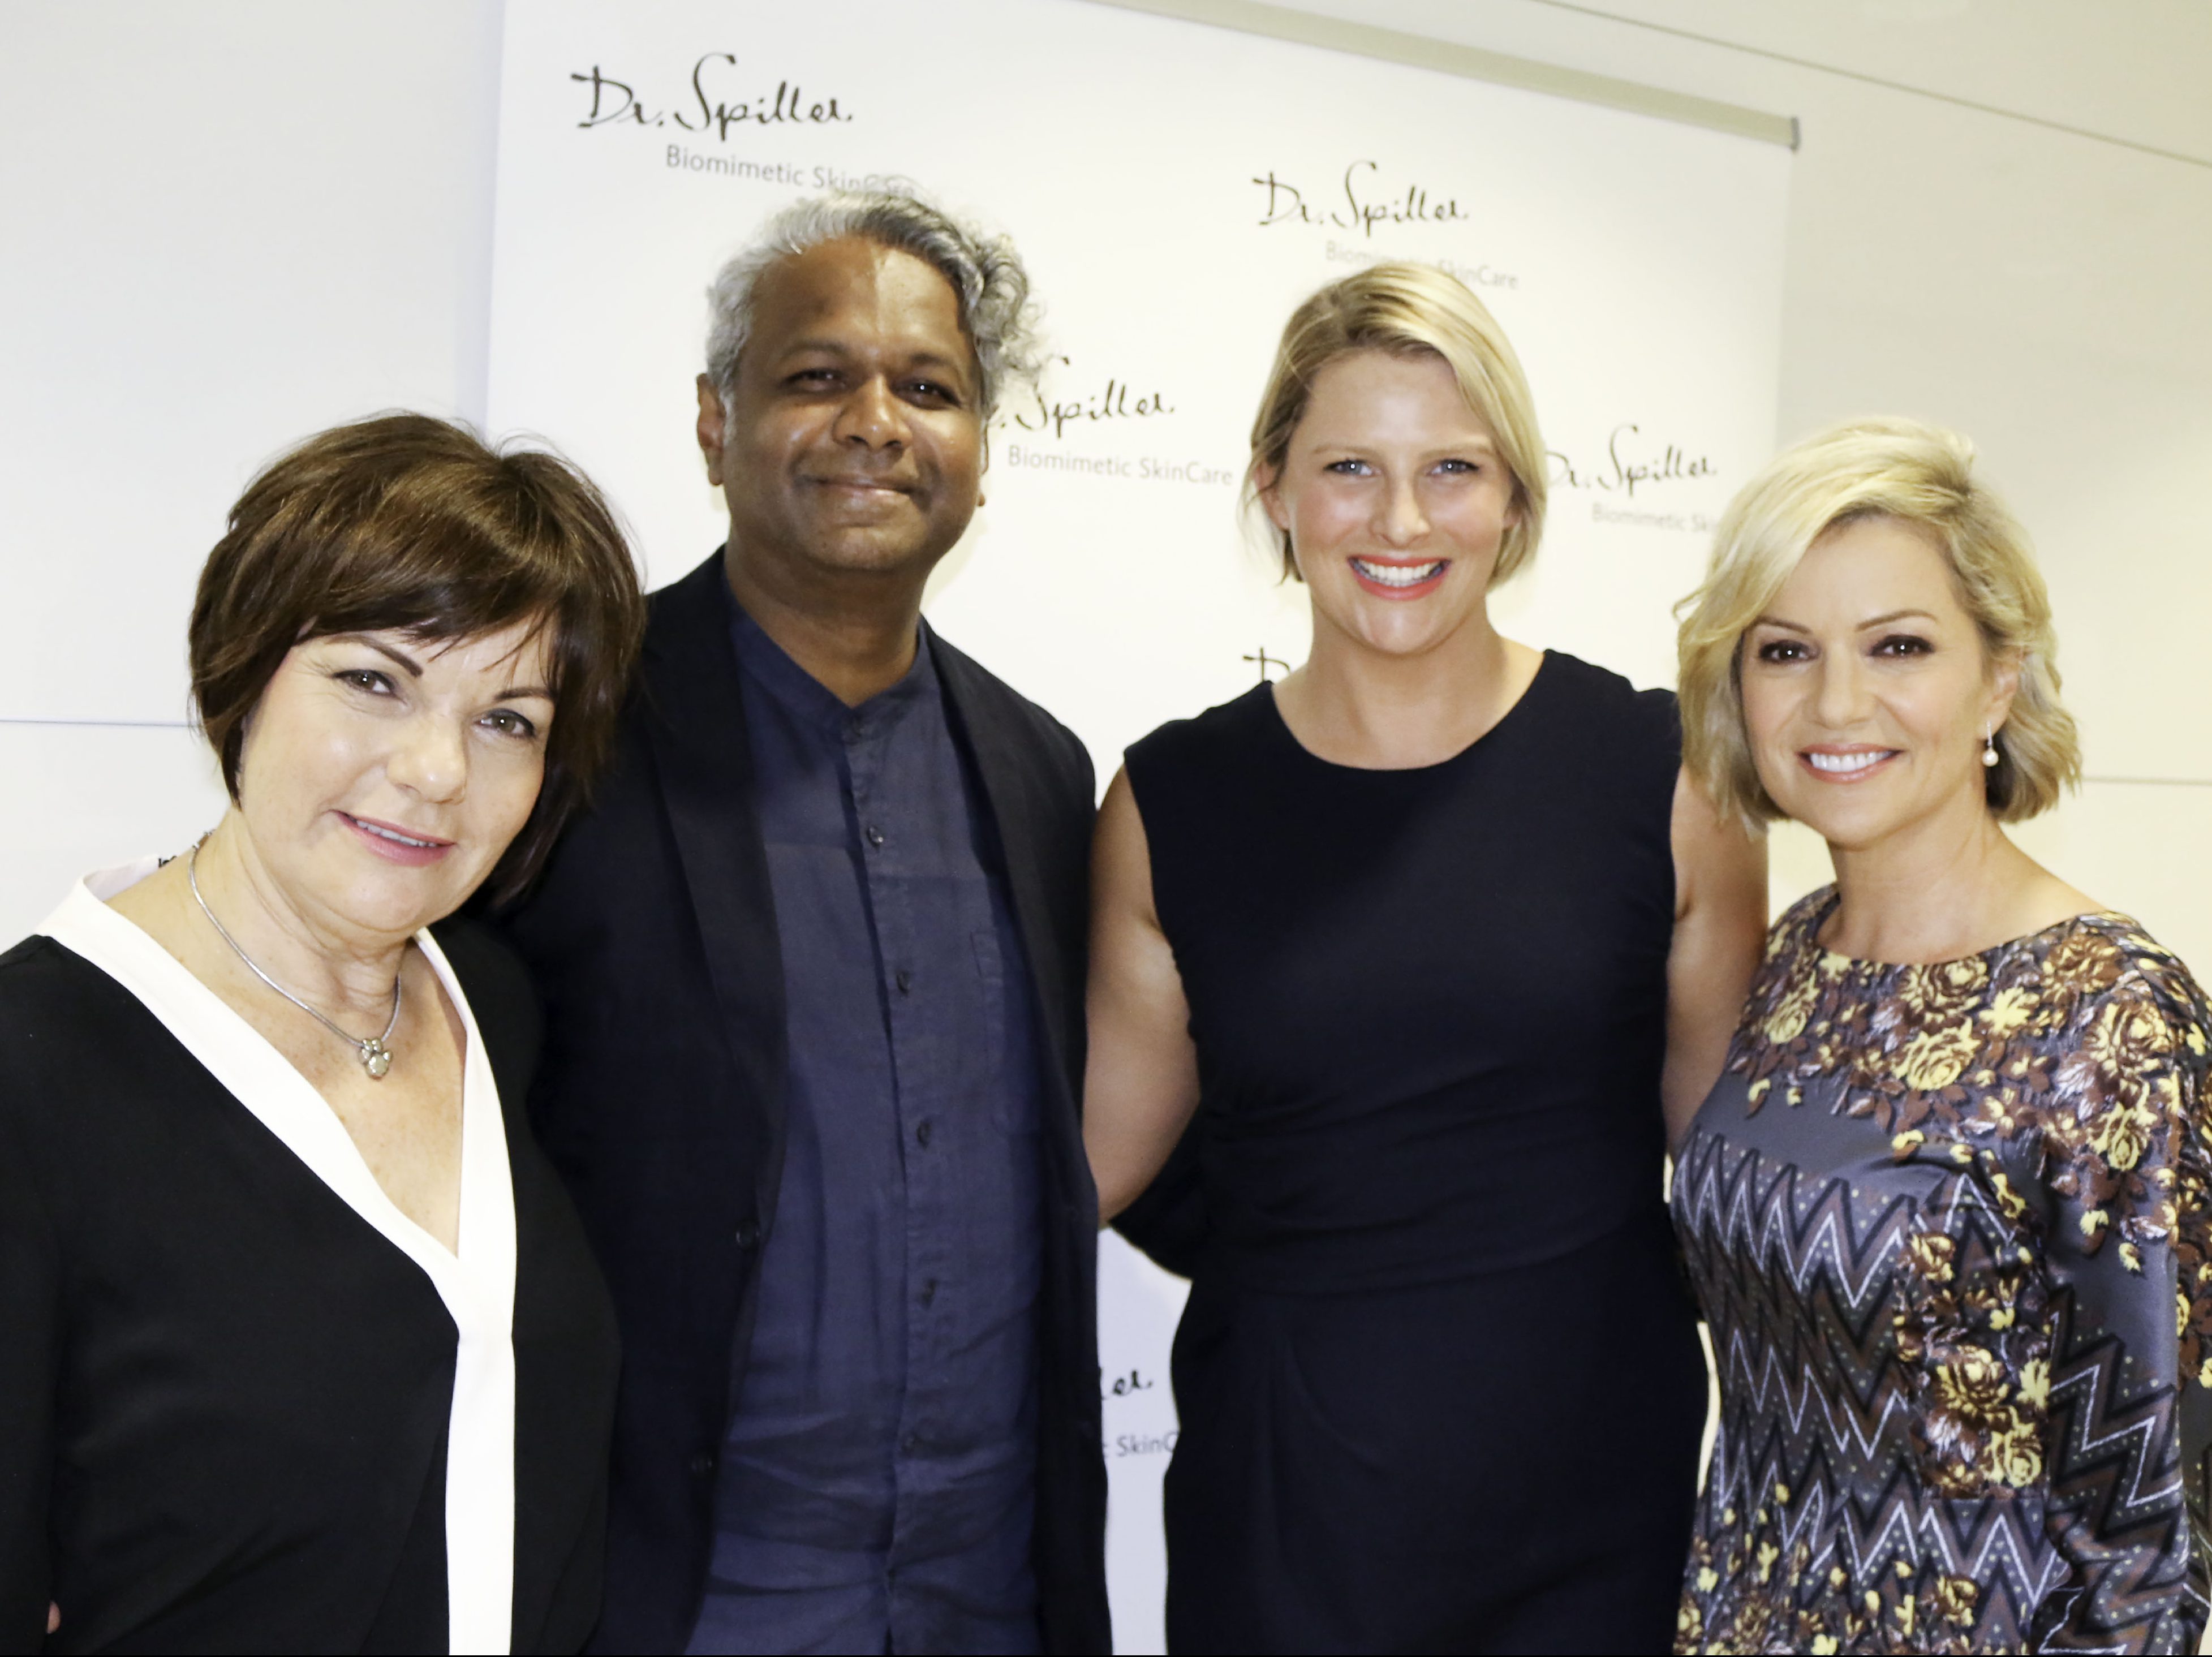 Dr Spiller treats lucky 13 to a VIP night at Face Plus Medispa   